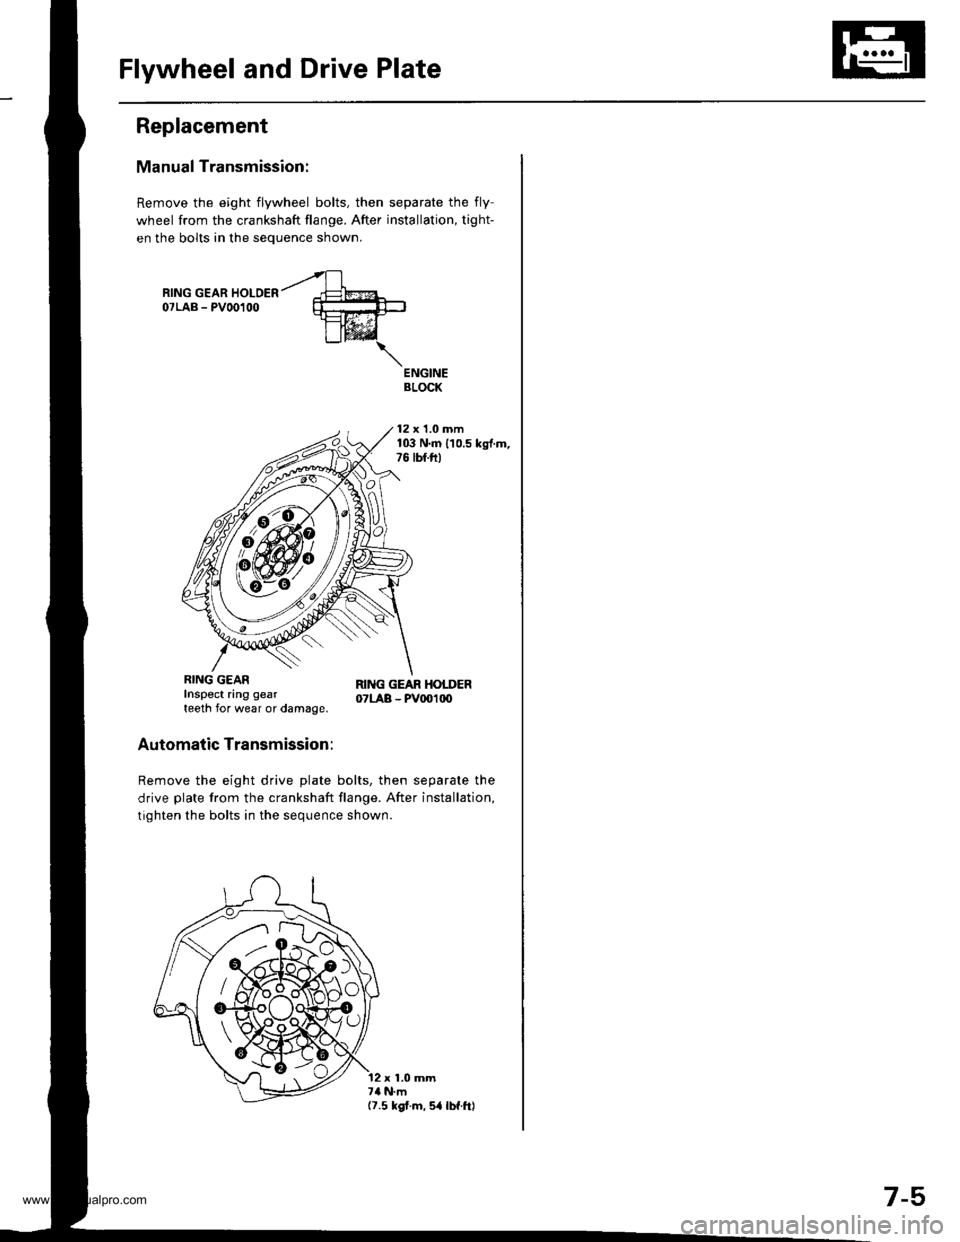 HONDA CR-V 1998 RD1-RD3 / 1.G User Guide 
Flywheel and Drive Plate
Replacement
Manual Transmission:
Remove the eight flywheel bolts, then separate the fly-
wheel from the crankshaft flange. After installation, tight-
en the bolts in the sequ